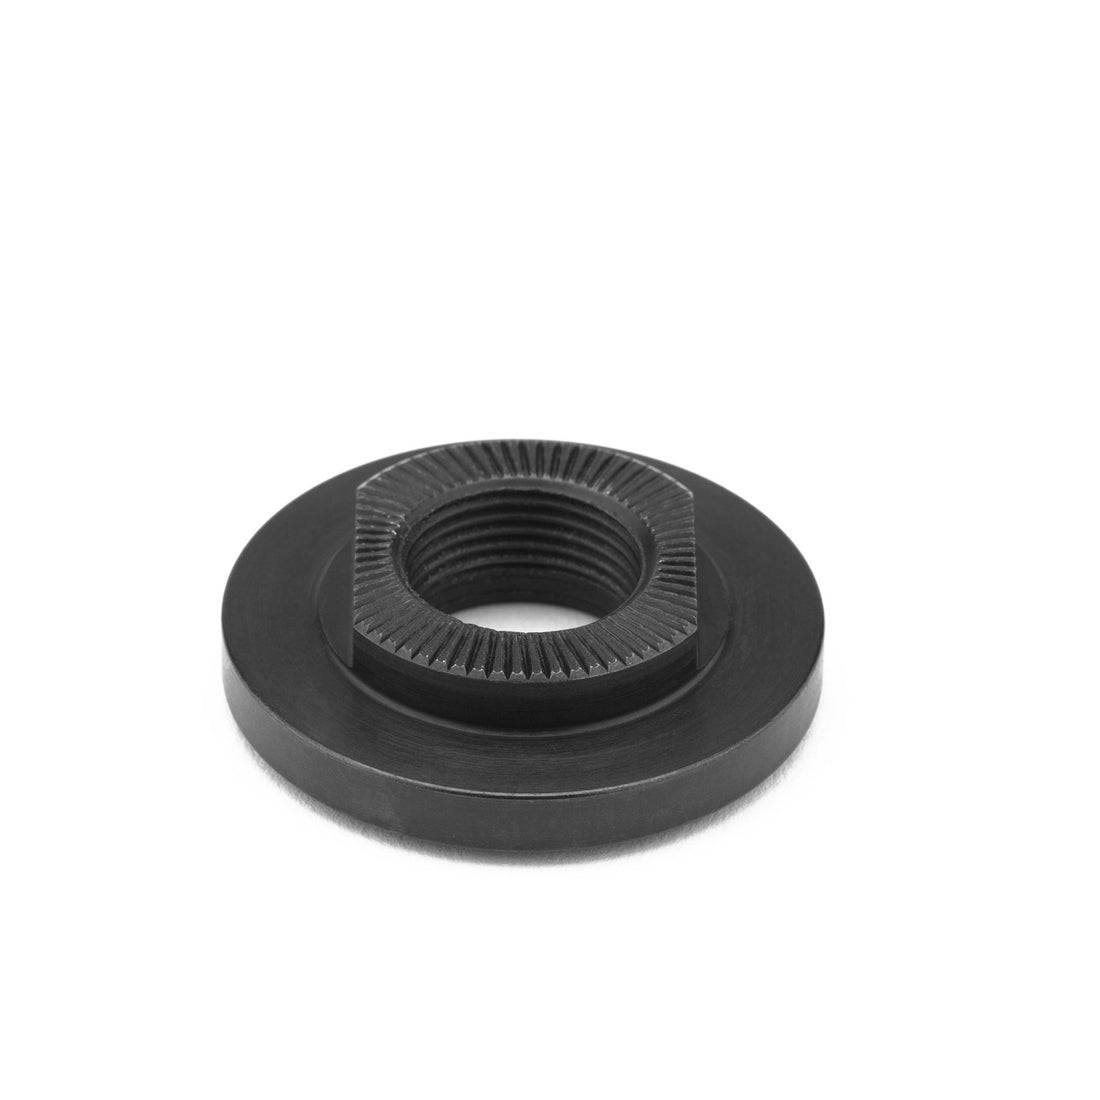 Cinema|FX2 REAR DS CONE |Cycle LM (4550129877085)